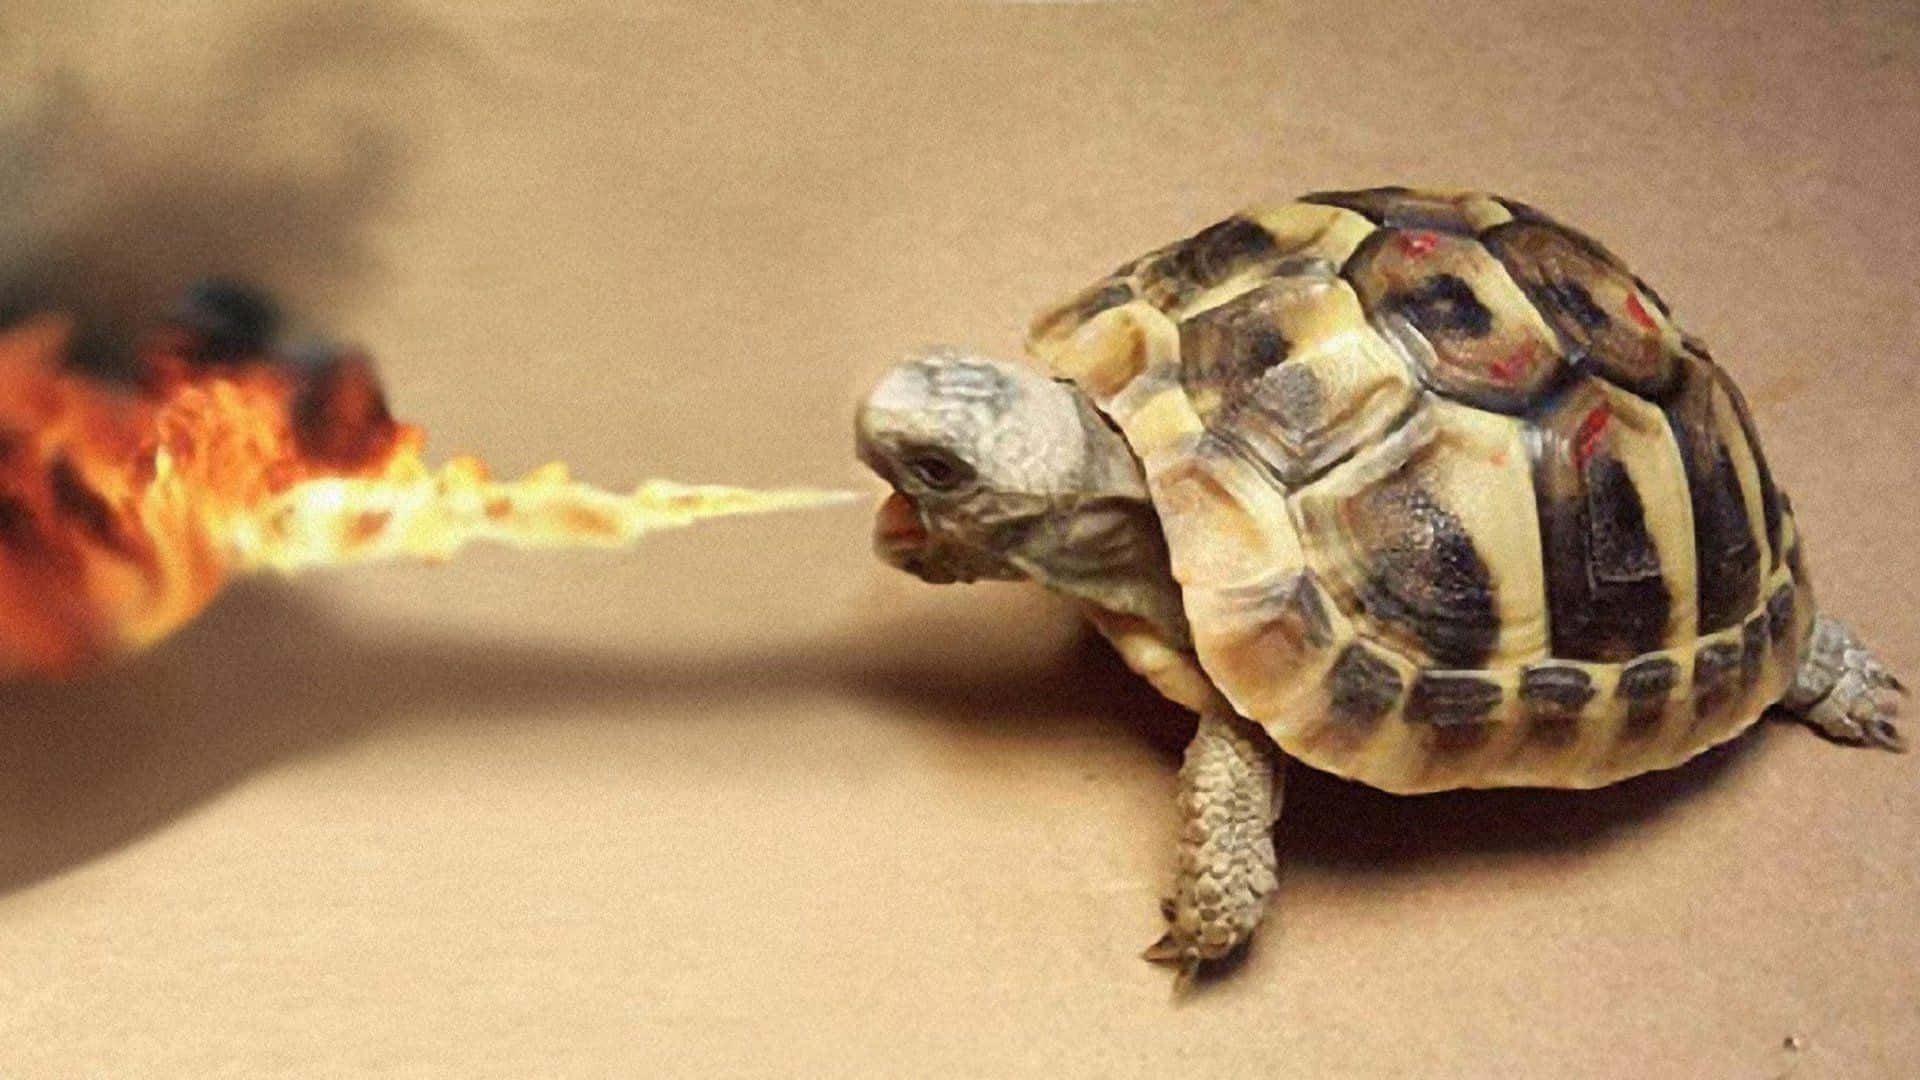 Take a break, and laugh with this hilarious turtle!